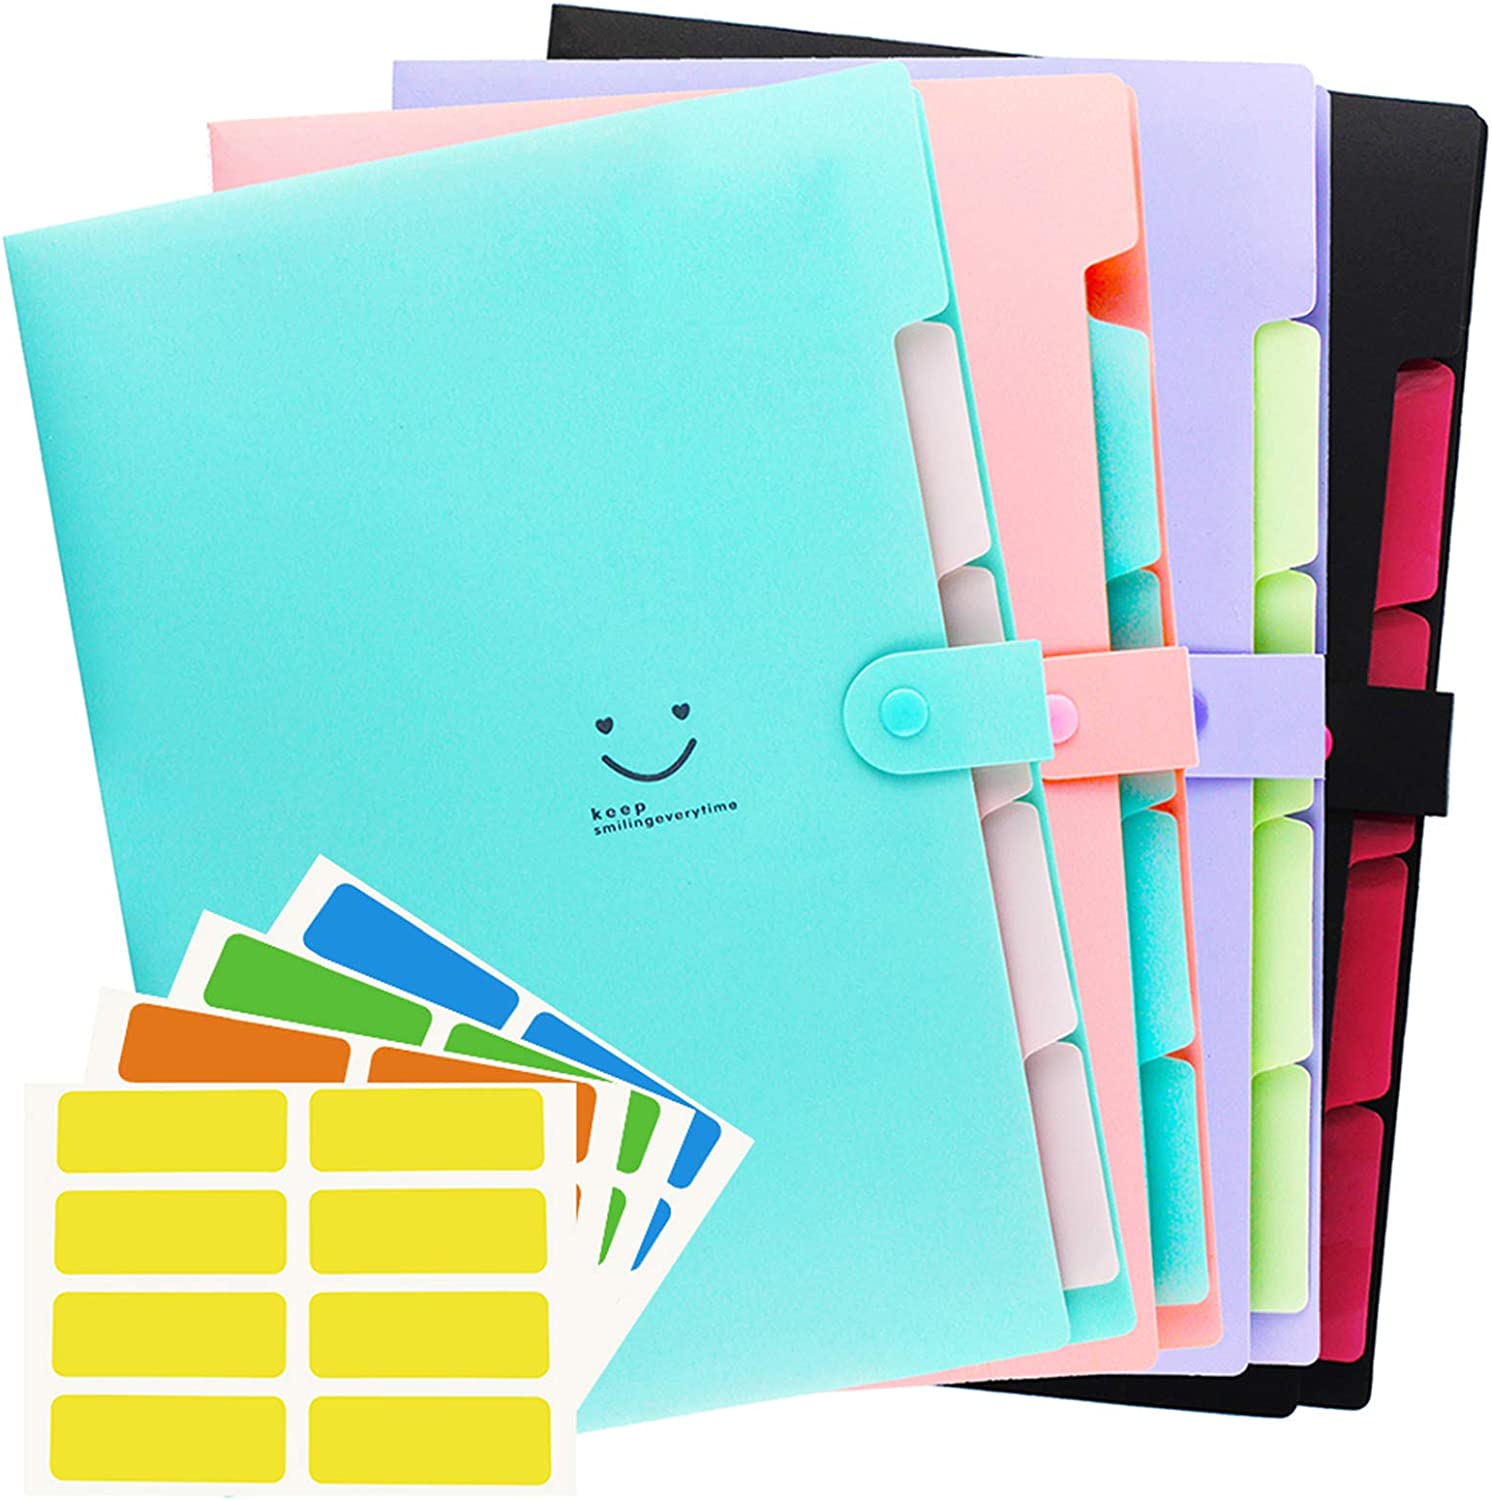 Filly Wink Personal Organizing Folders For School, 4-Pack